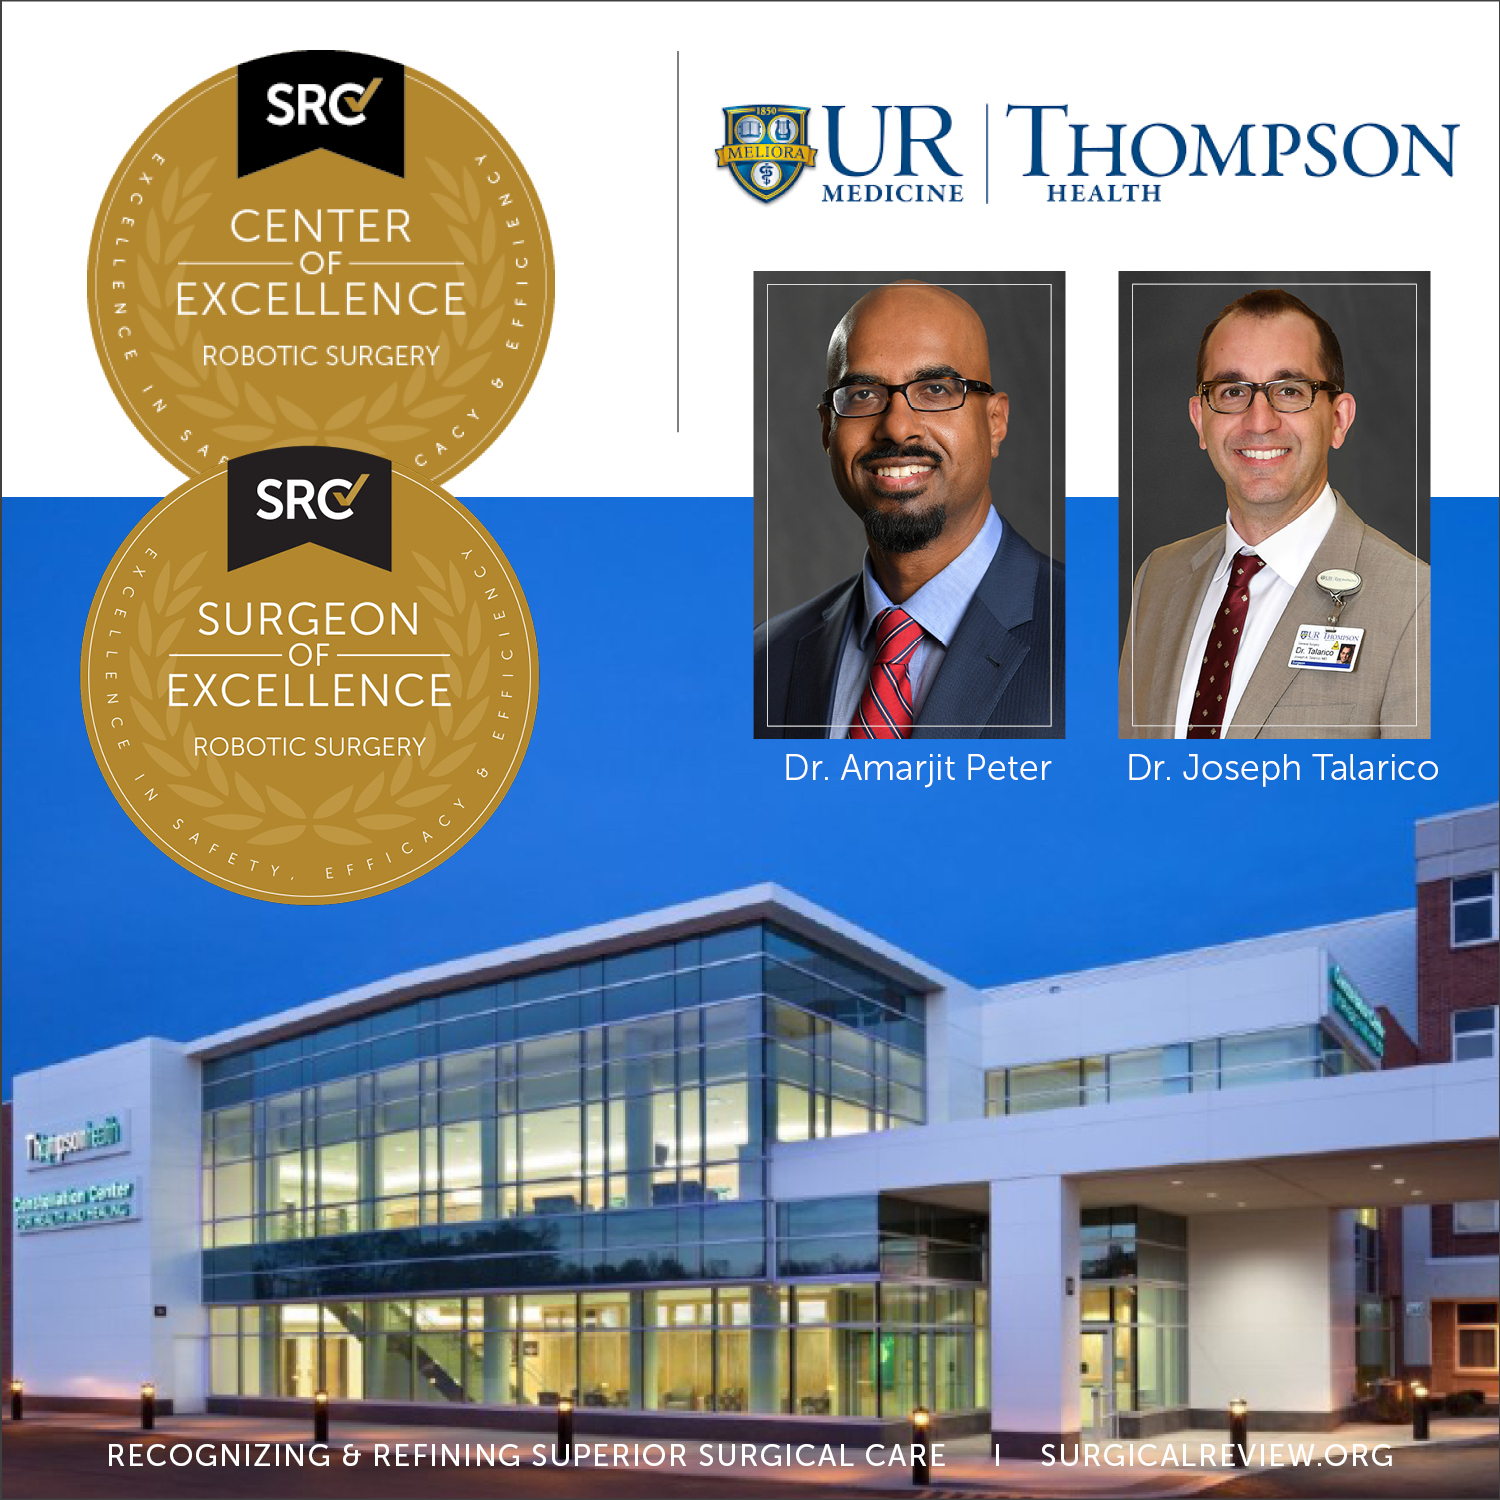 SRC accredited Center of Excellence in Robotic Surgery